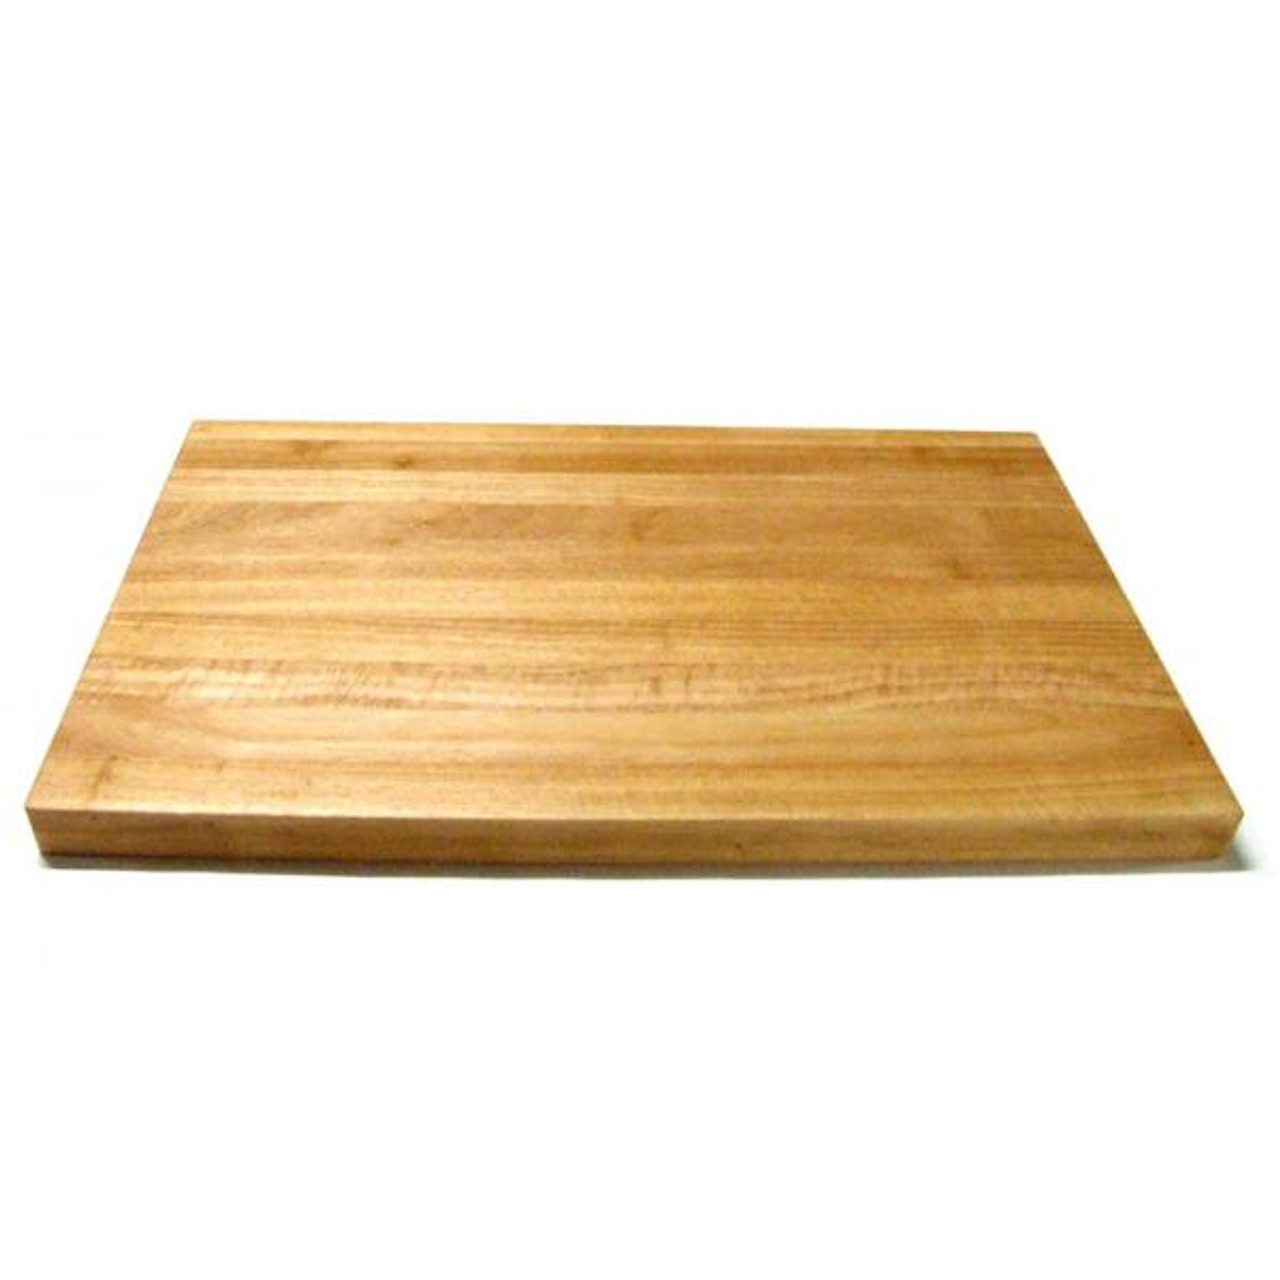 Rustic Cutting Board Old Style Board Strong Vintage Chopping -  Israel